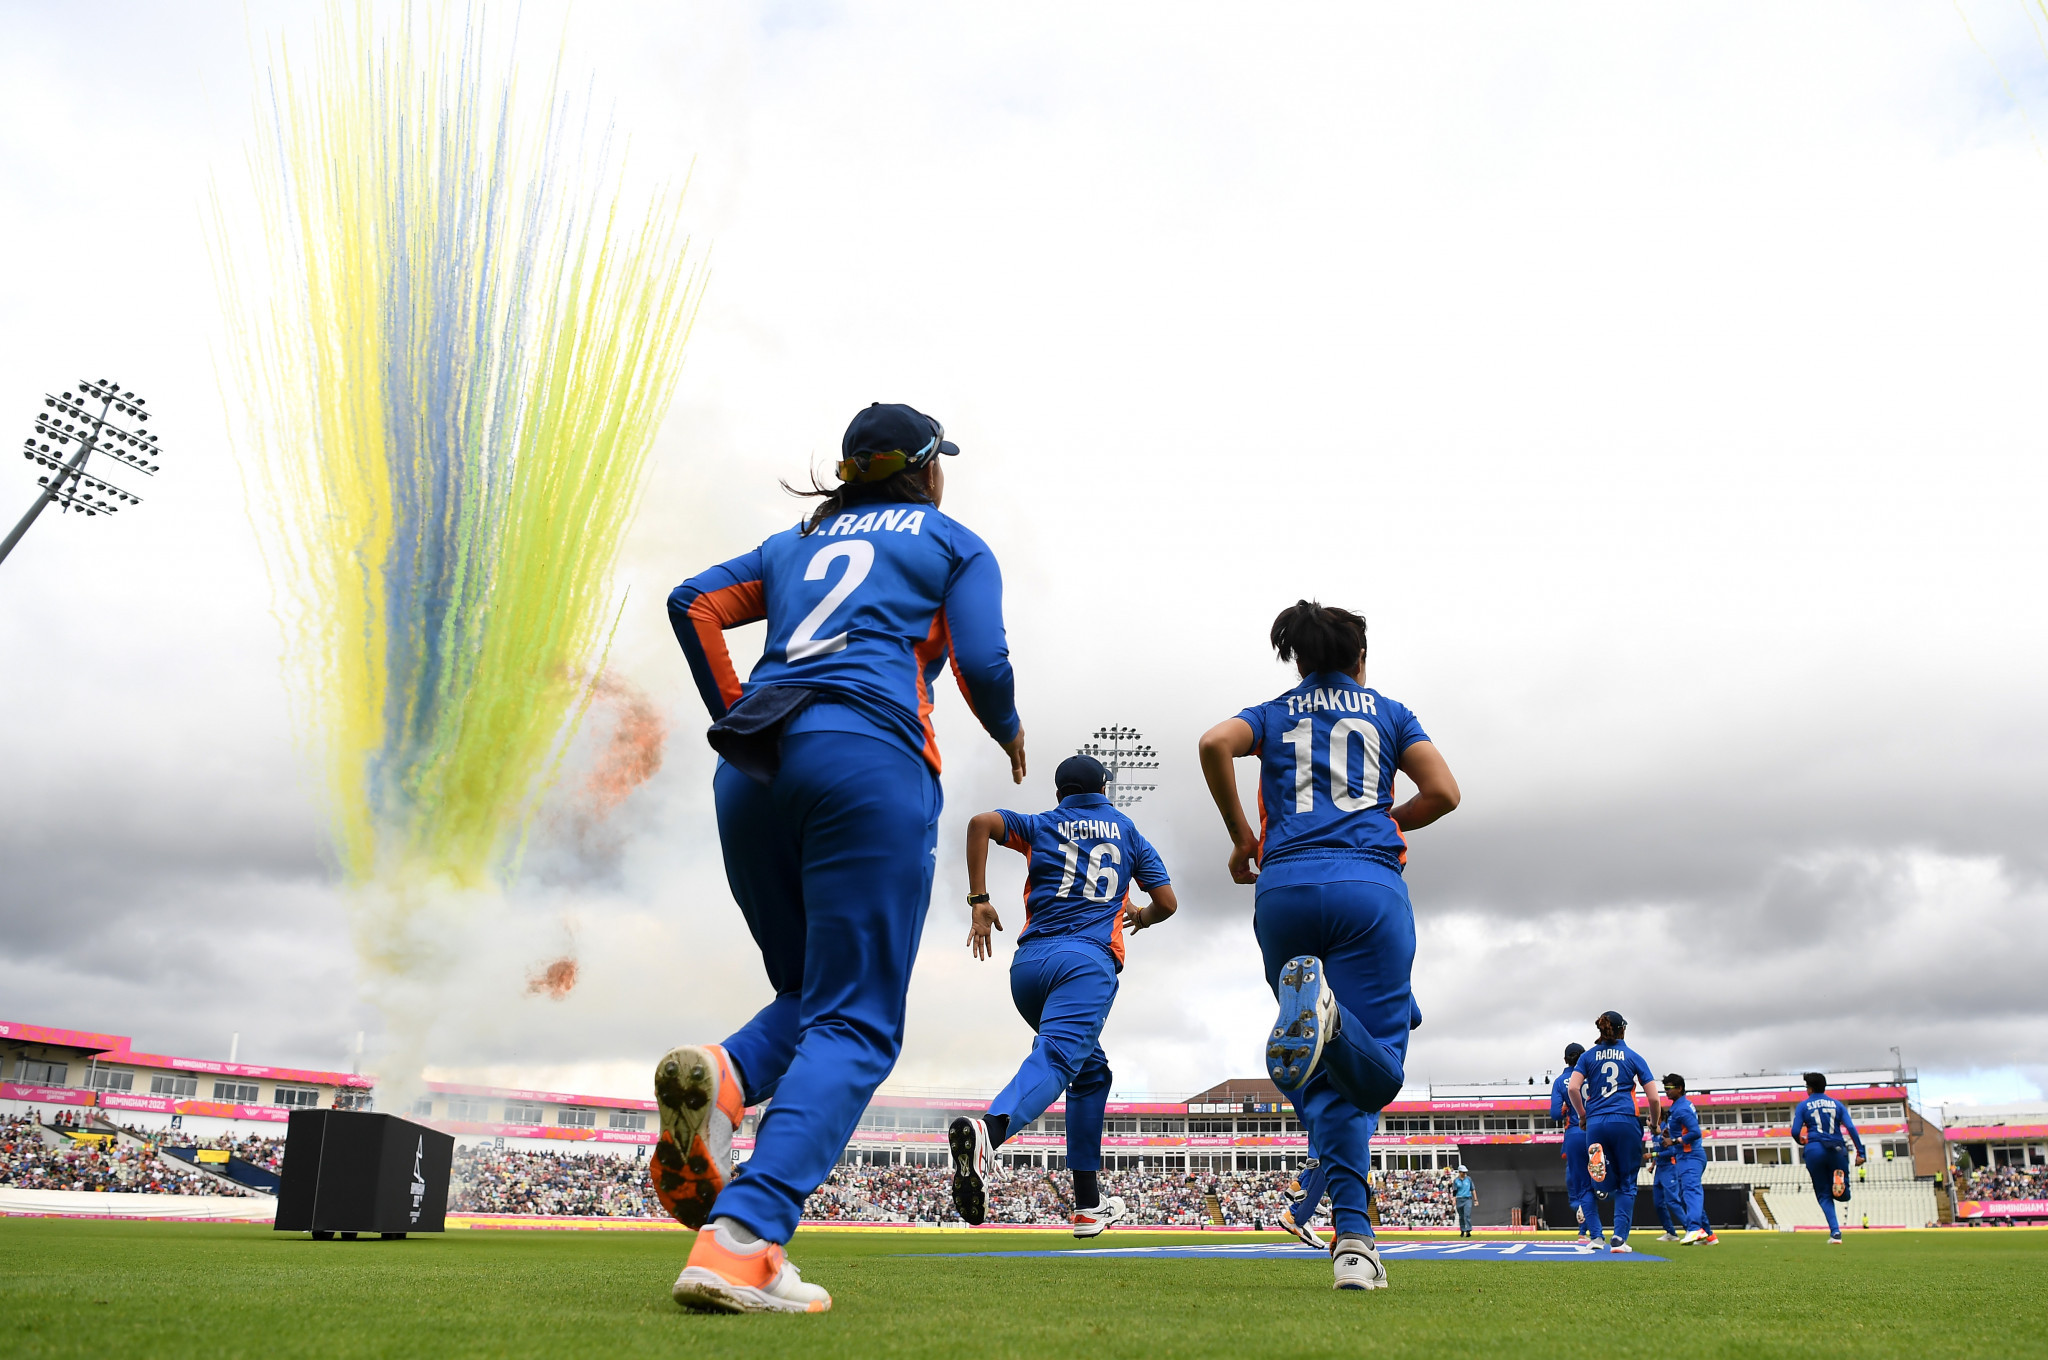 Women's T20 cricket is making its first appearance at the Commonwealth Games in Birmingham ©Getty Images